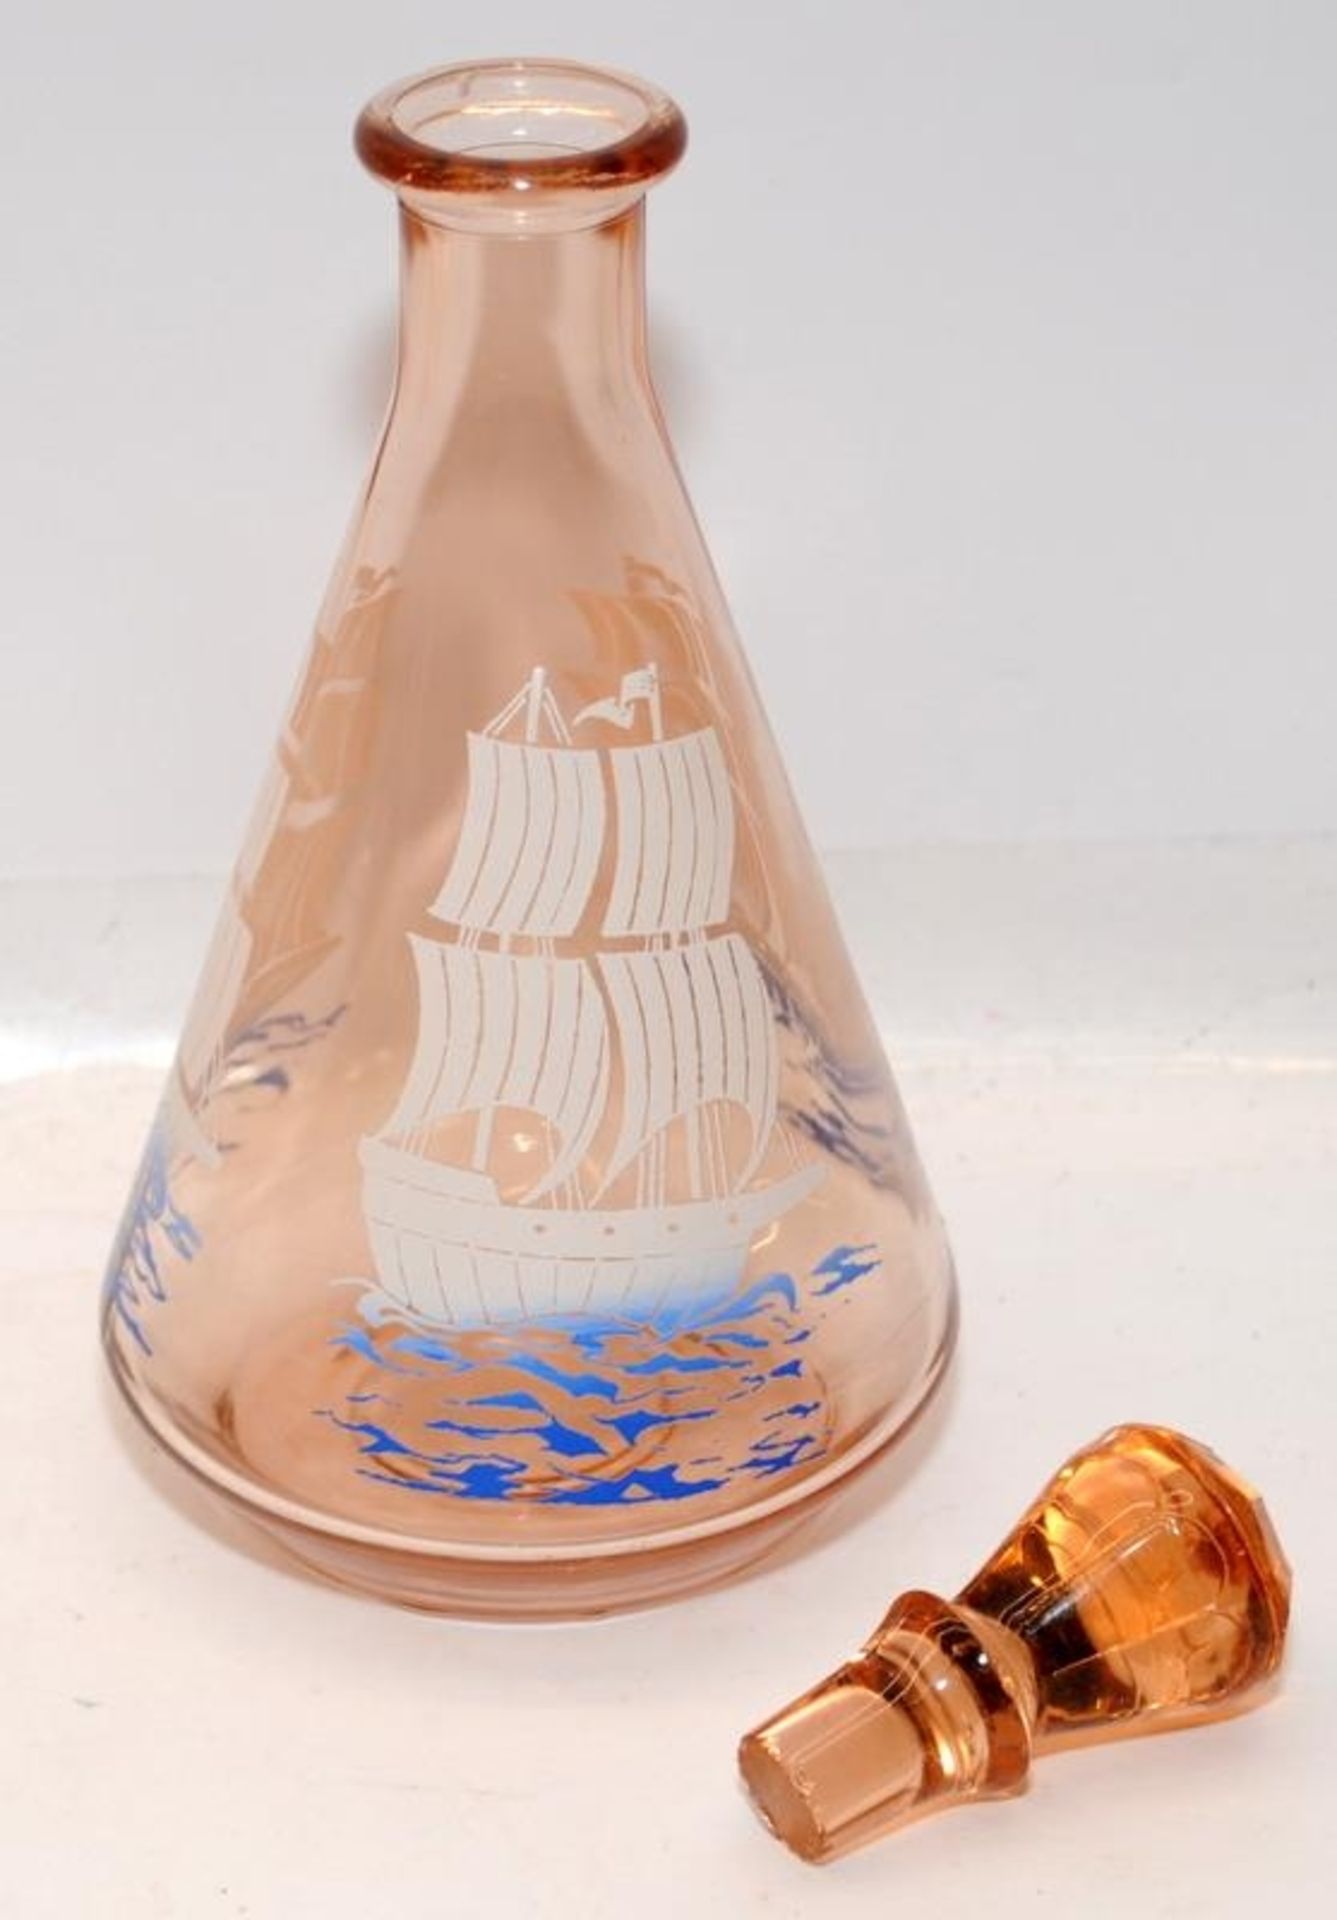 Vintage mid-century peach glass decanter featuring a ship c/w four shot glasses - Image 2 of 3